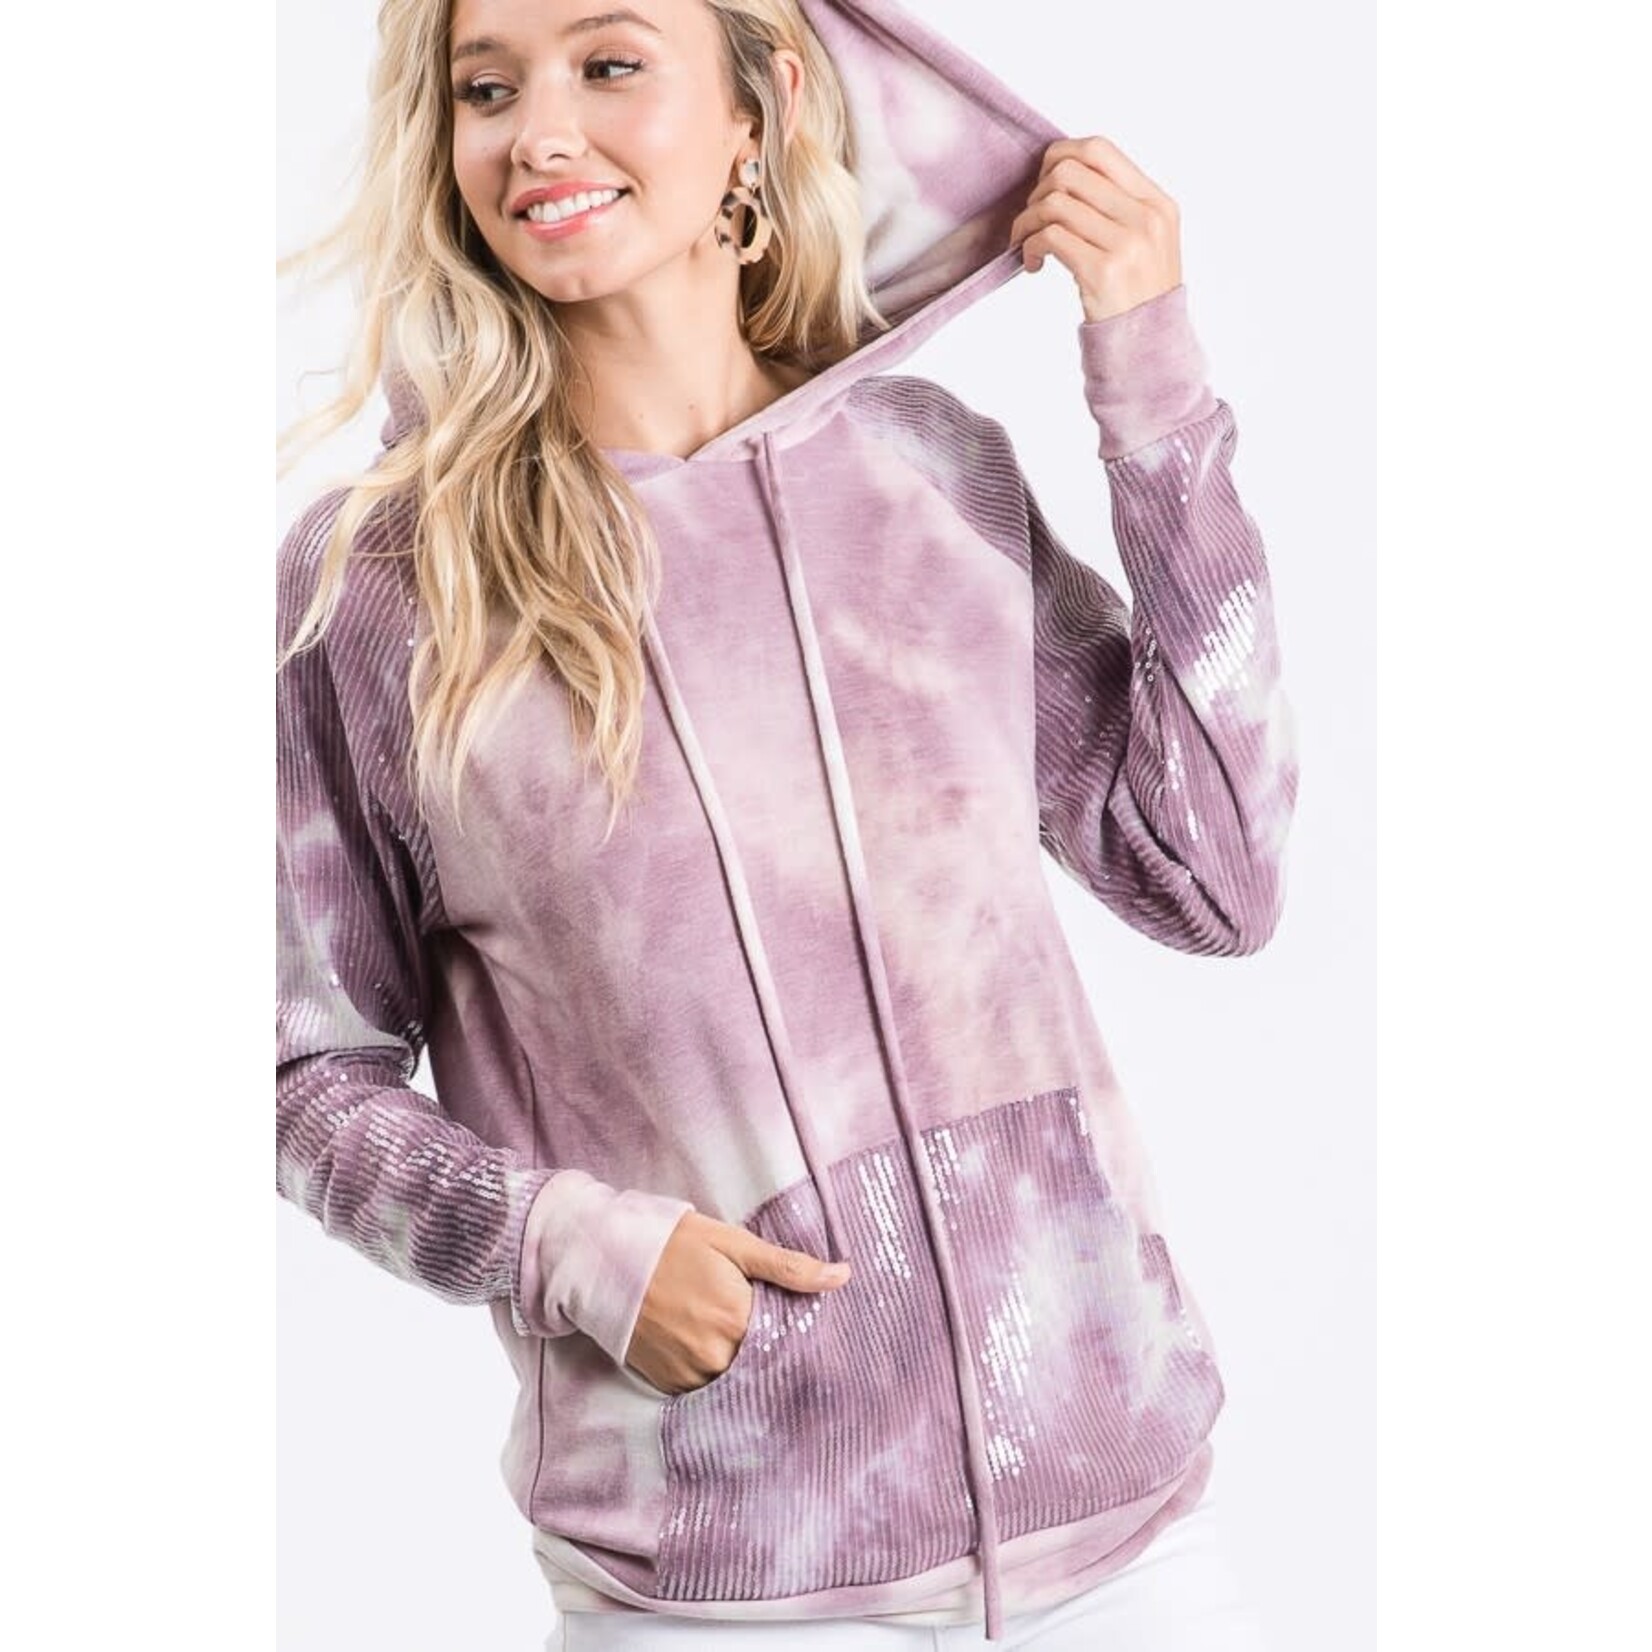 7th Ray 7th Ray Tie Dye Sequin Contrast Hoodie